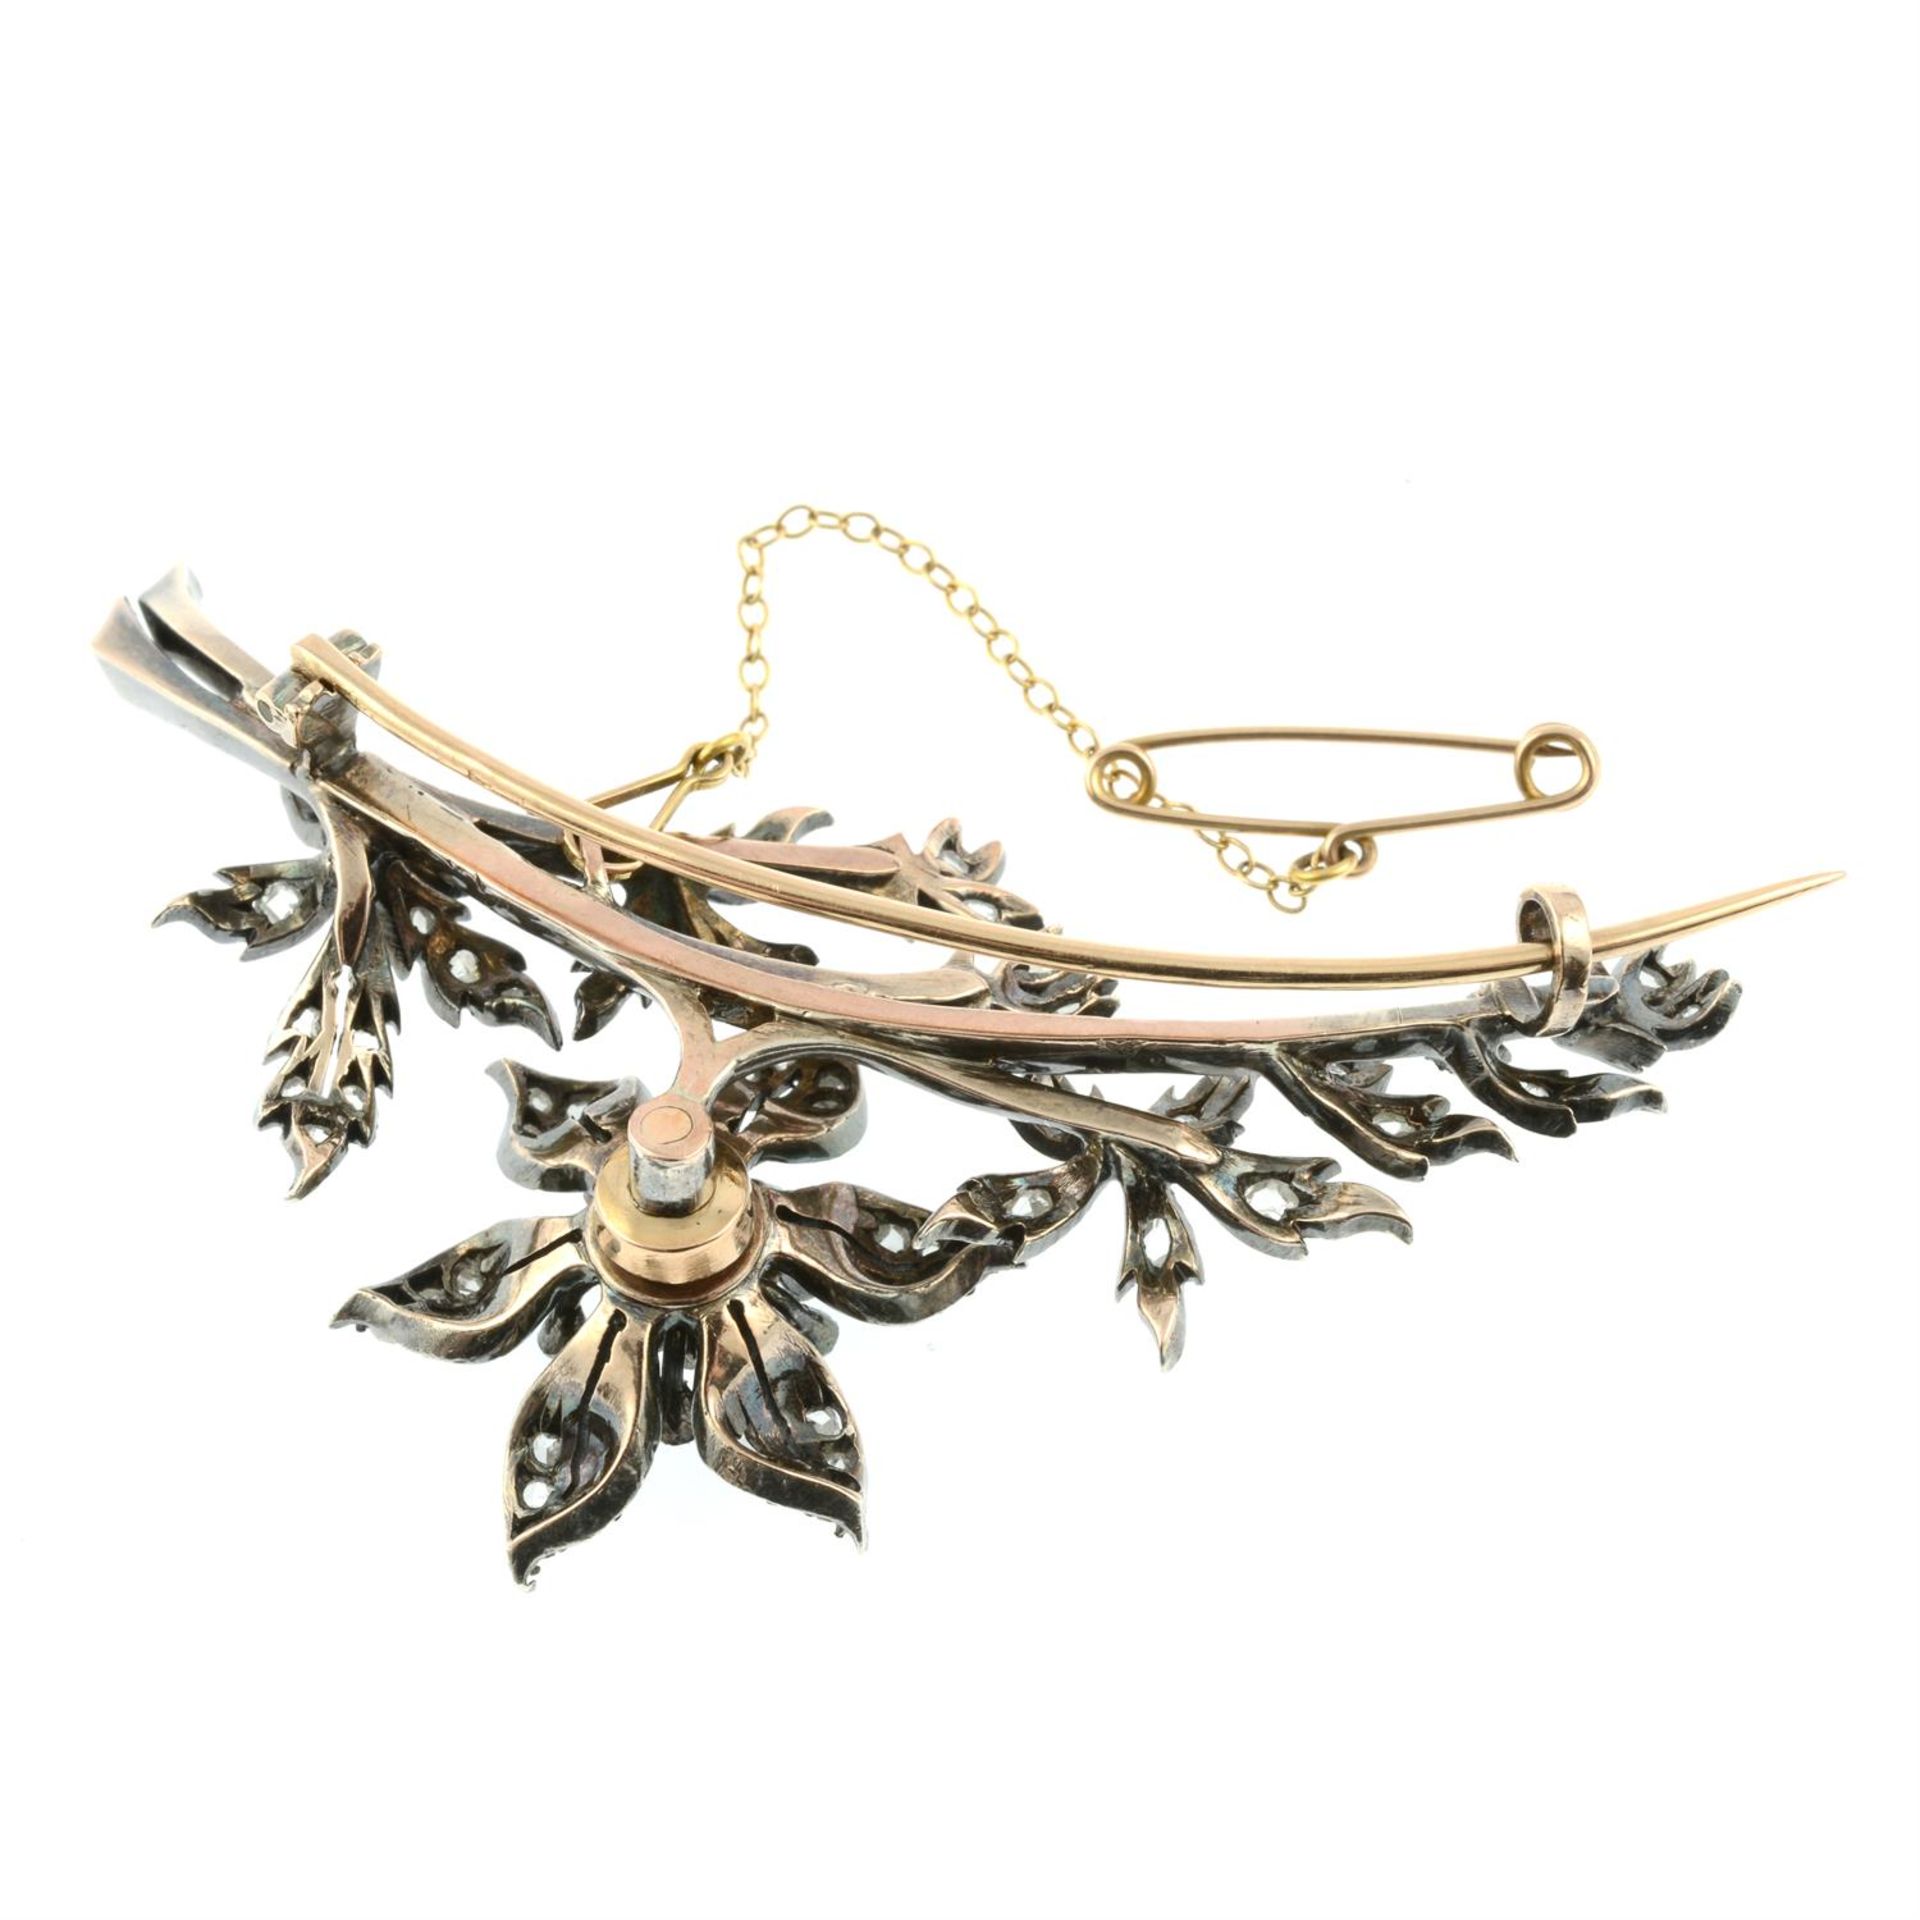 A mid 19th century silver and gold old and rose-cut diamond floral spray brooch, set en tremblant. - Image 3 of 4